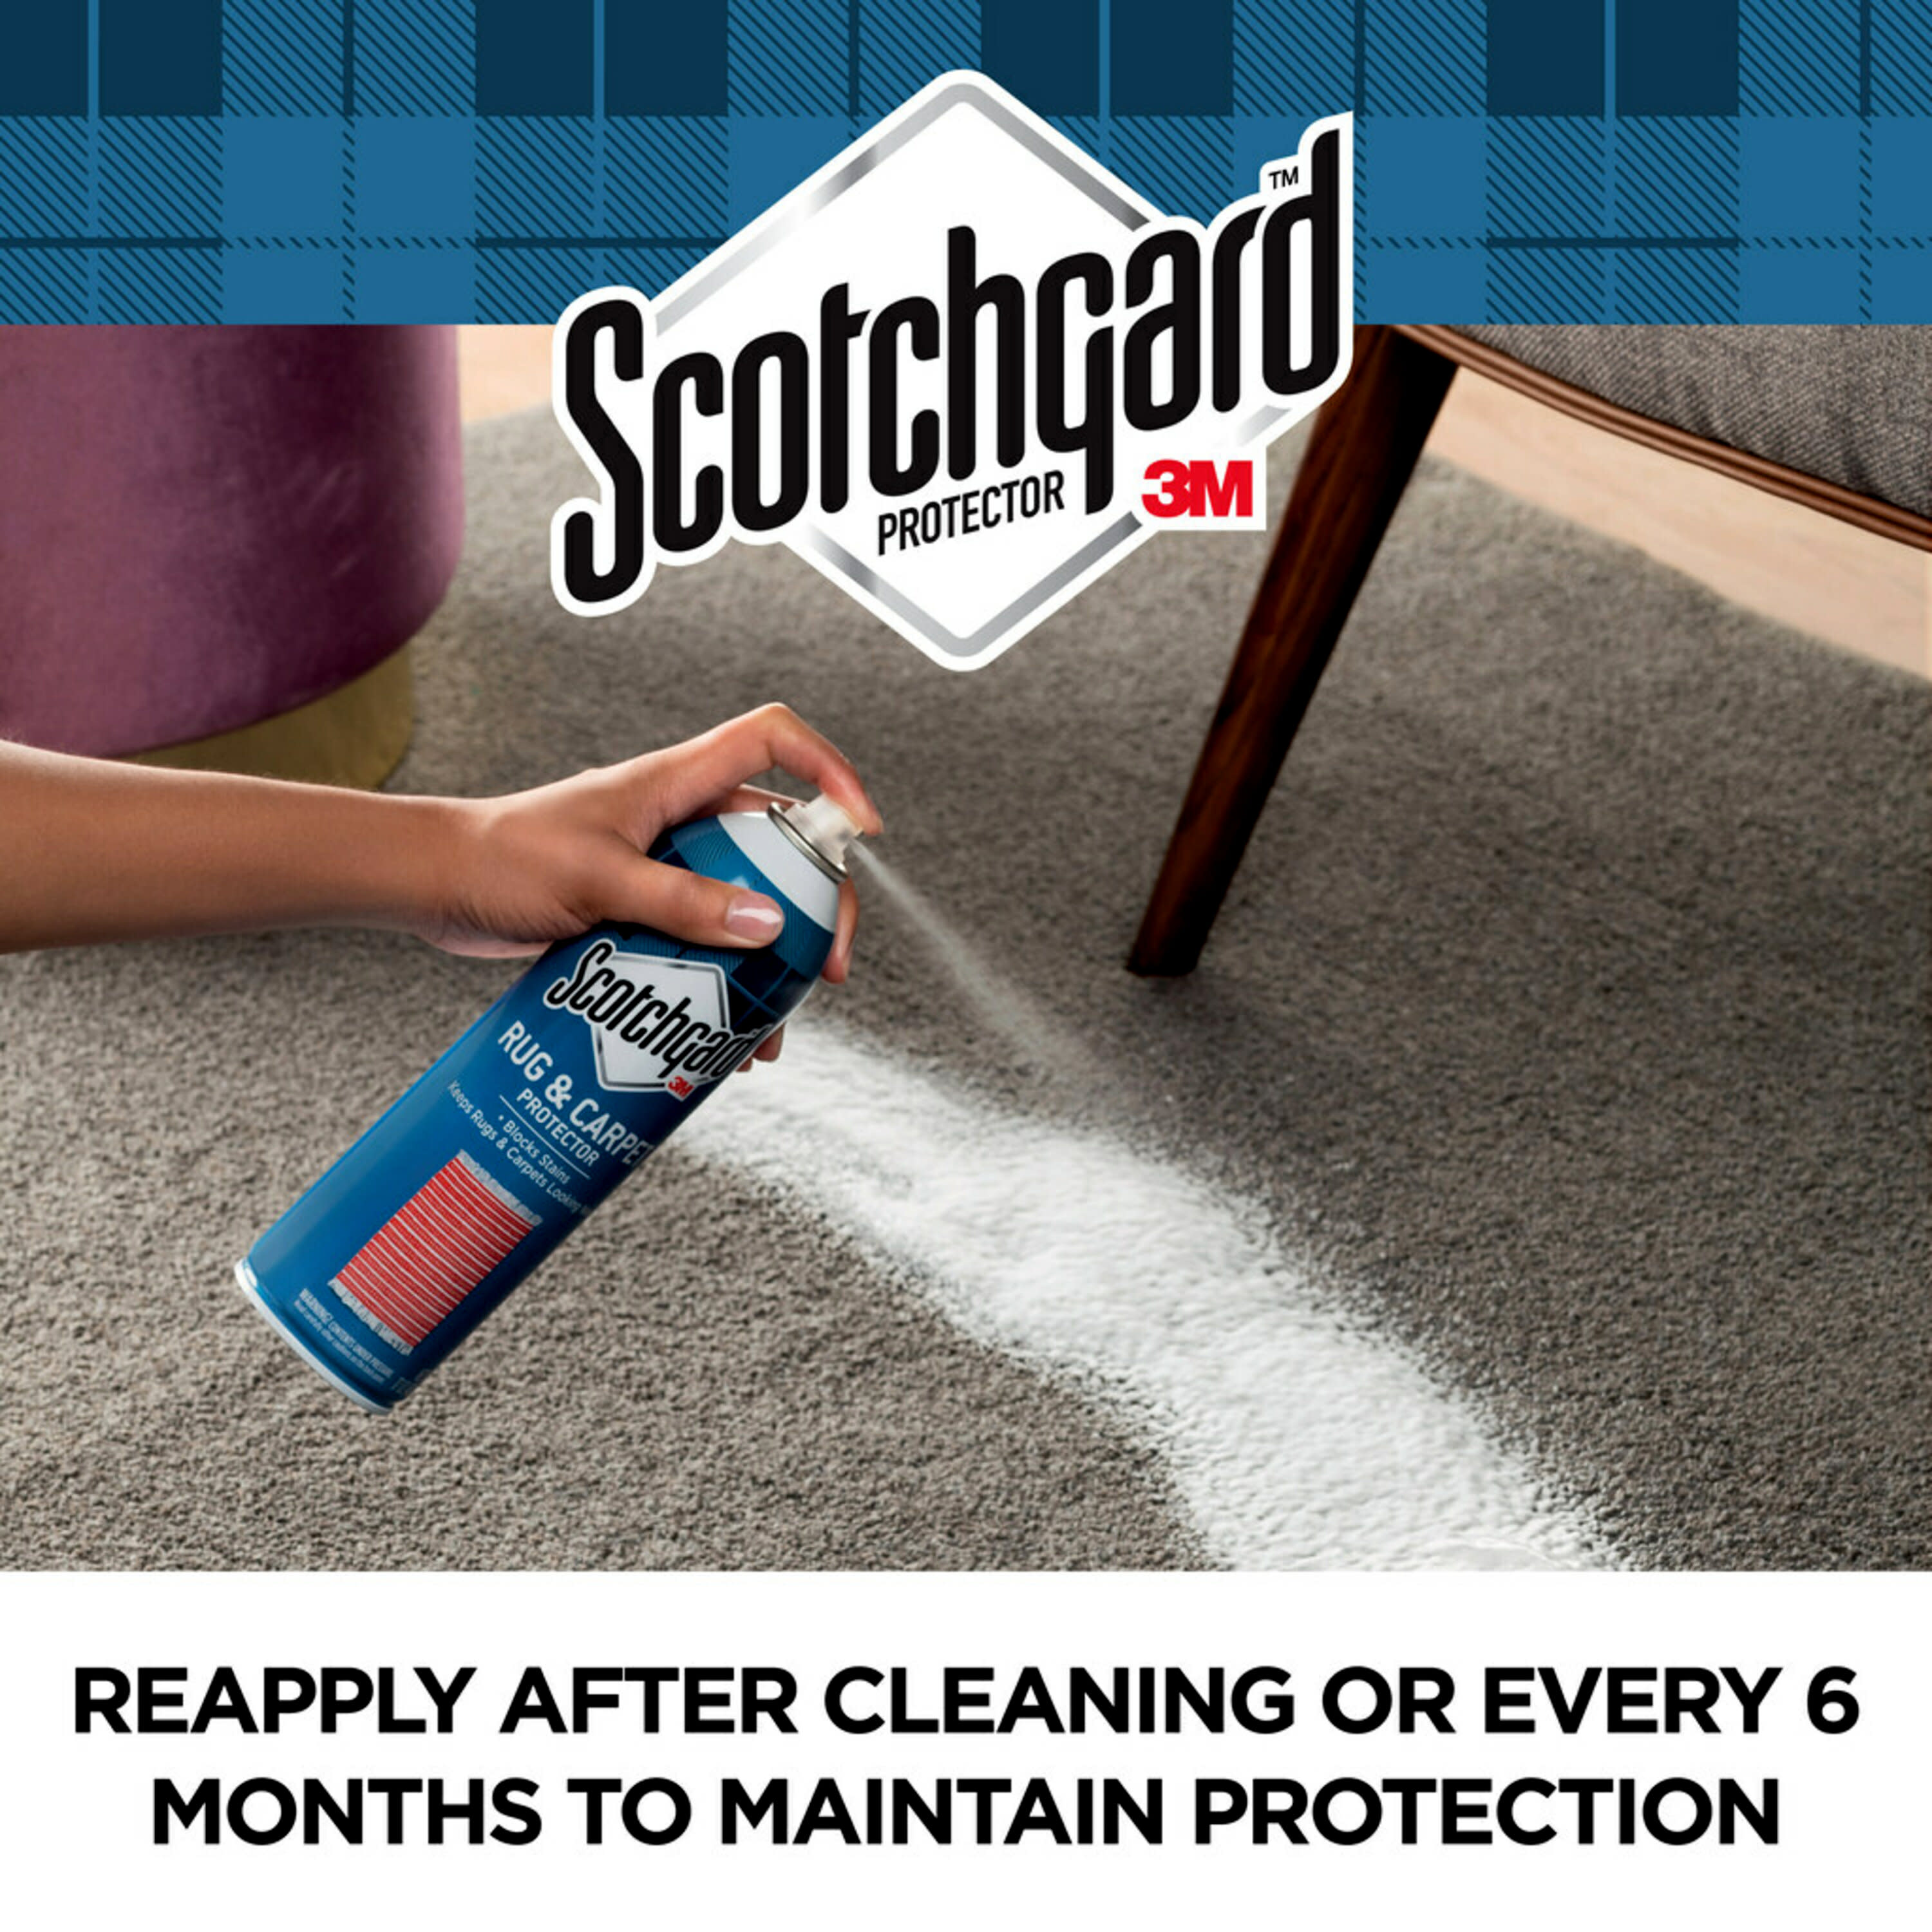 Scotchgard Rug and Carpet Protector Spray 17-oz in the Carpet Cleaning  Solution department at